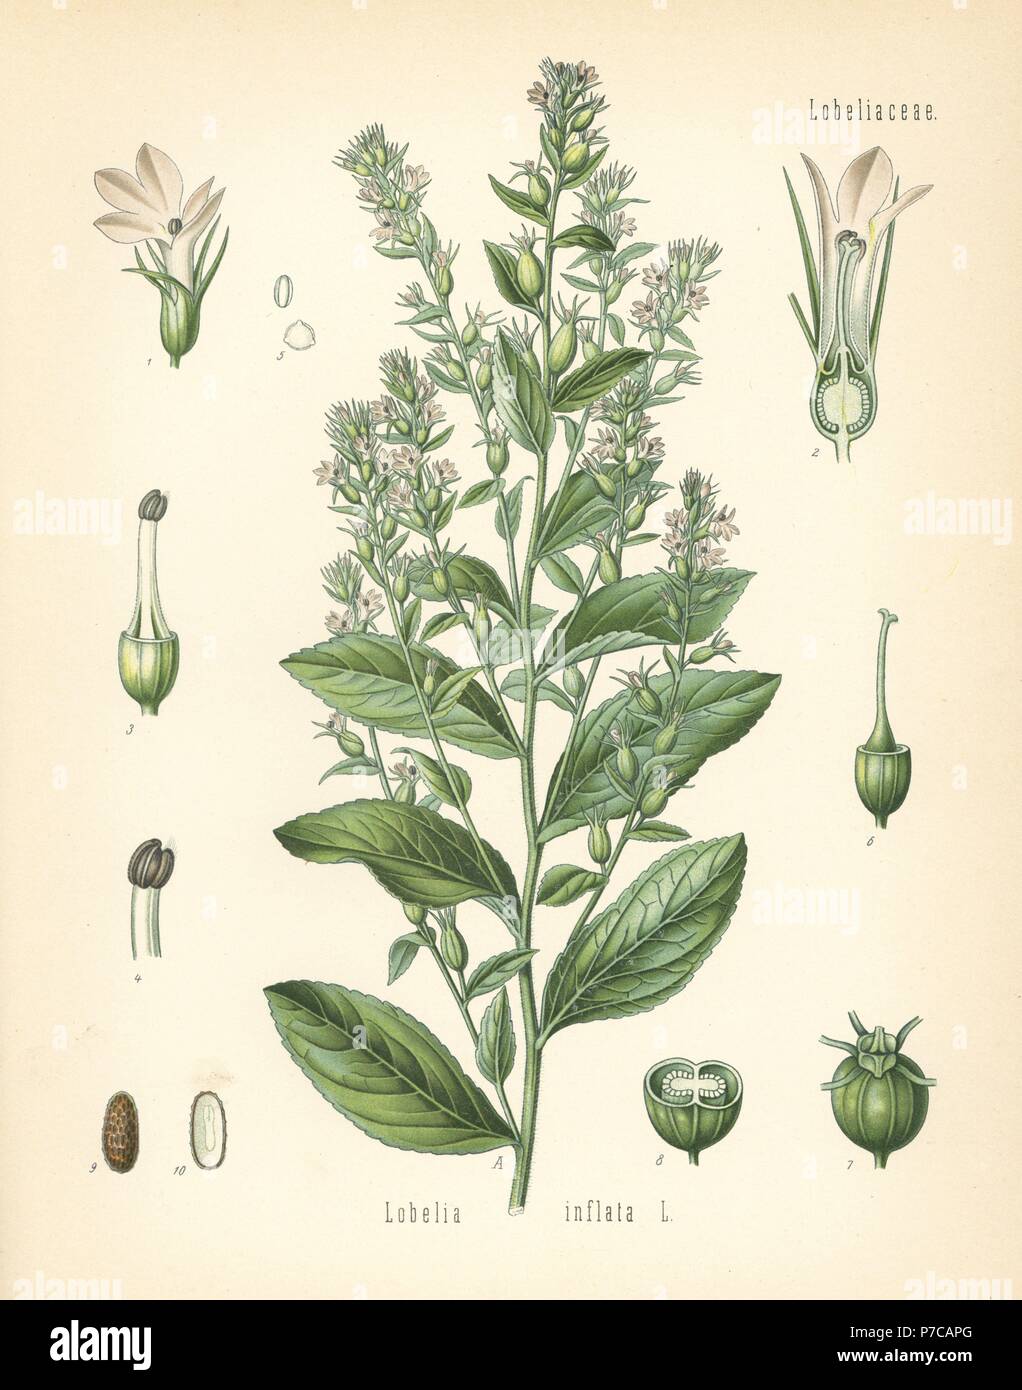 Indian tobacco or puke weed, Lobelia inflata. Chromolithograph after a botanical illustration from Hermann Adolph Koehler's Medicinal Plants, edited by Gustav Pabst, Koehler, Germany, 1887. Stock Photo